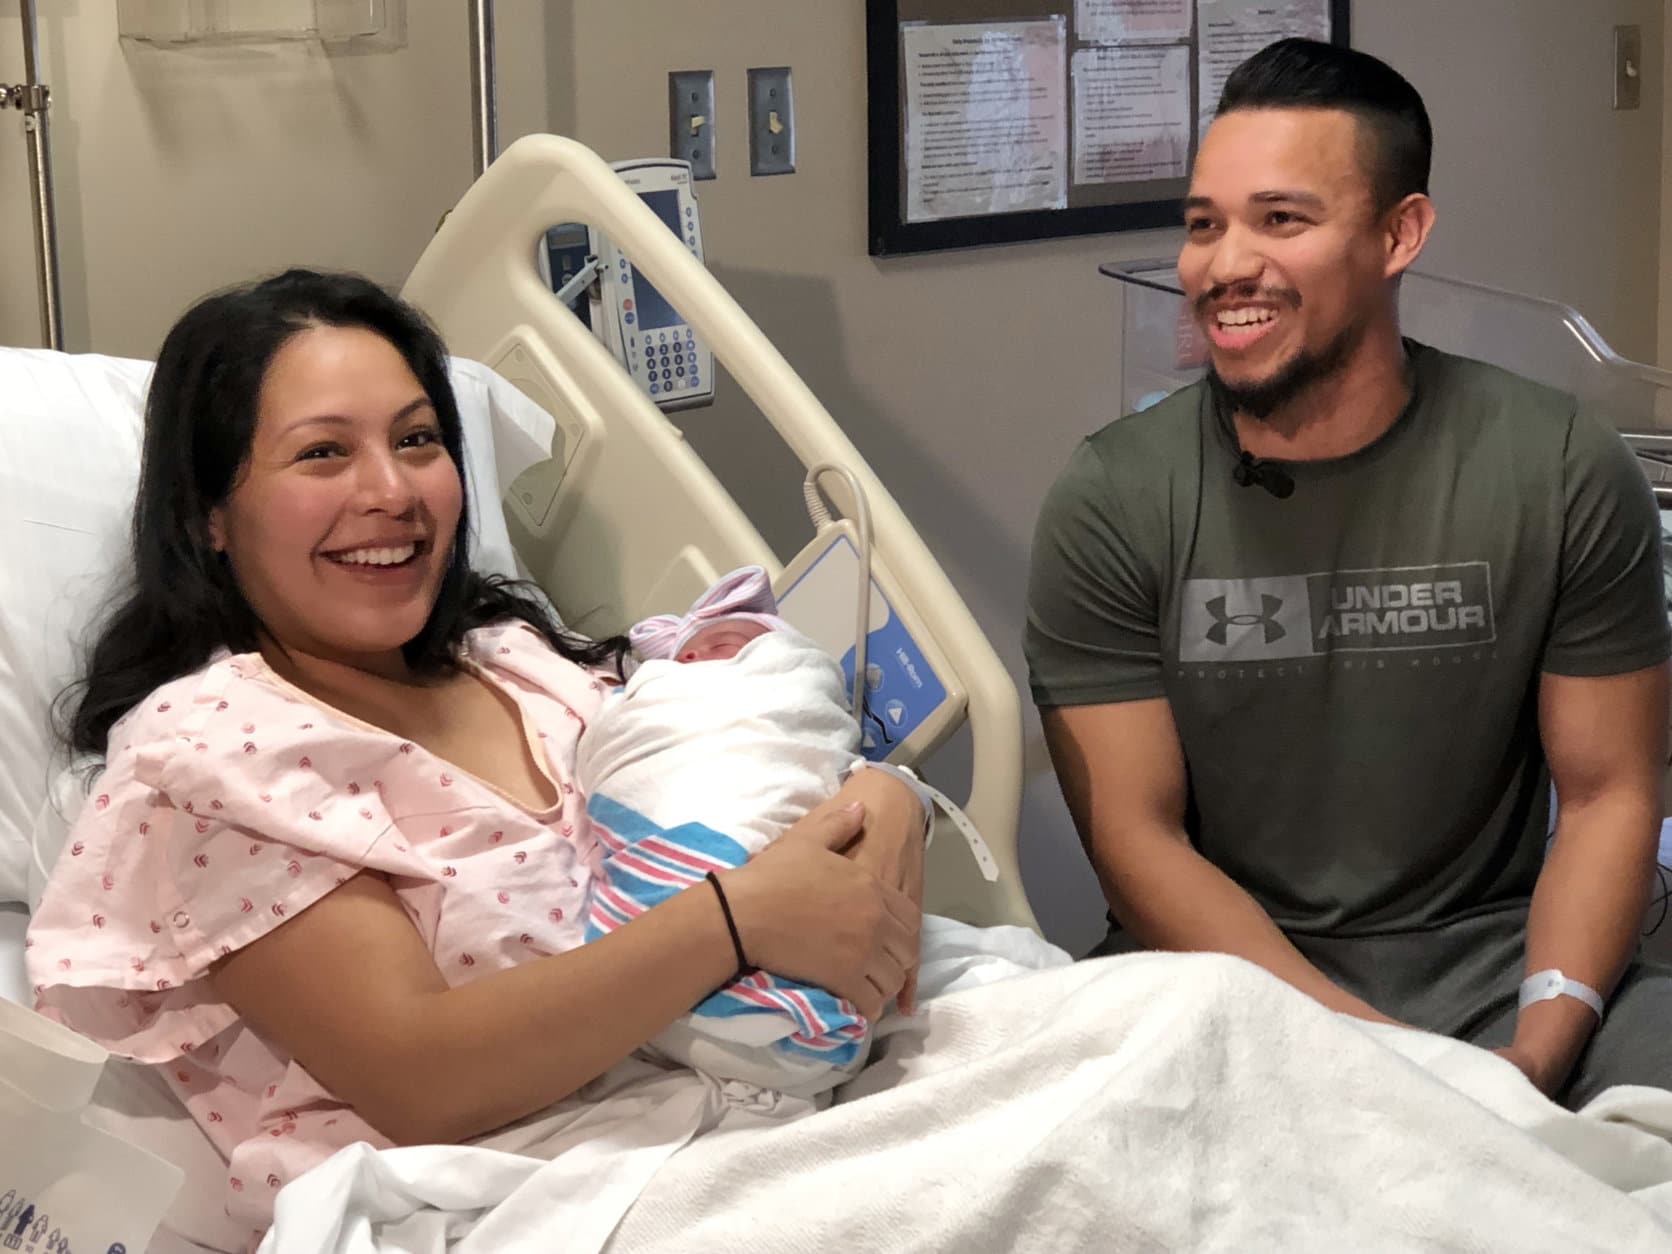 Julie Palancia and Silvio Morales of Silver Spring welcomed Meilani Morales   just after midnight at Shady Grove Medical Center. (Courtesy Adventist HealthCare Shady Grove Medical Center)